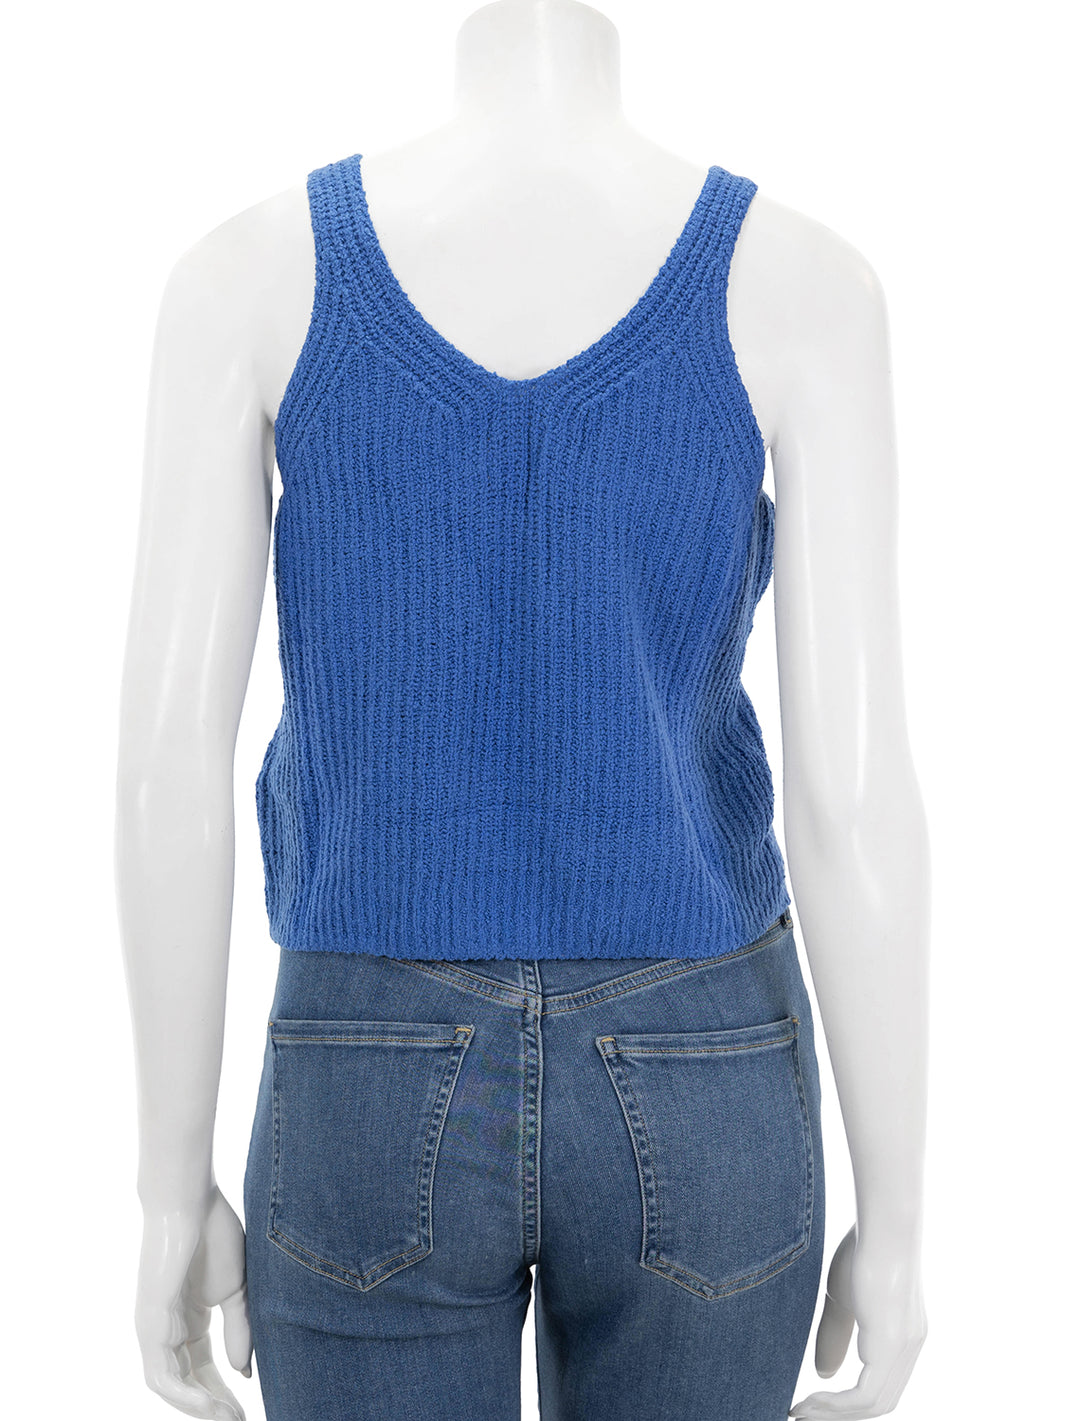 Back view of Nation LTD's cece sweater tank in palace blue.